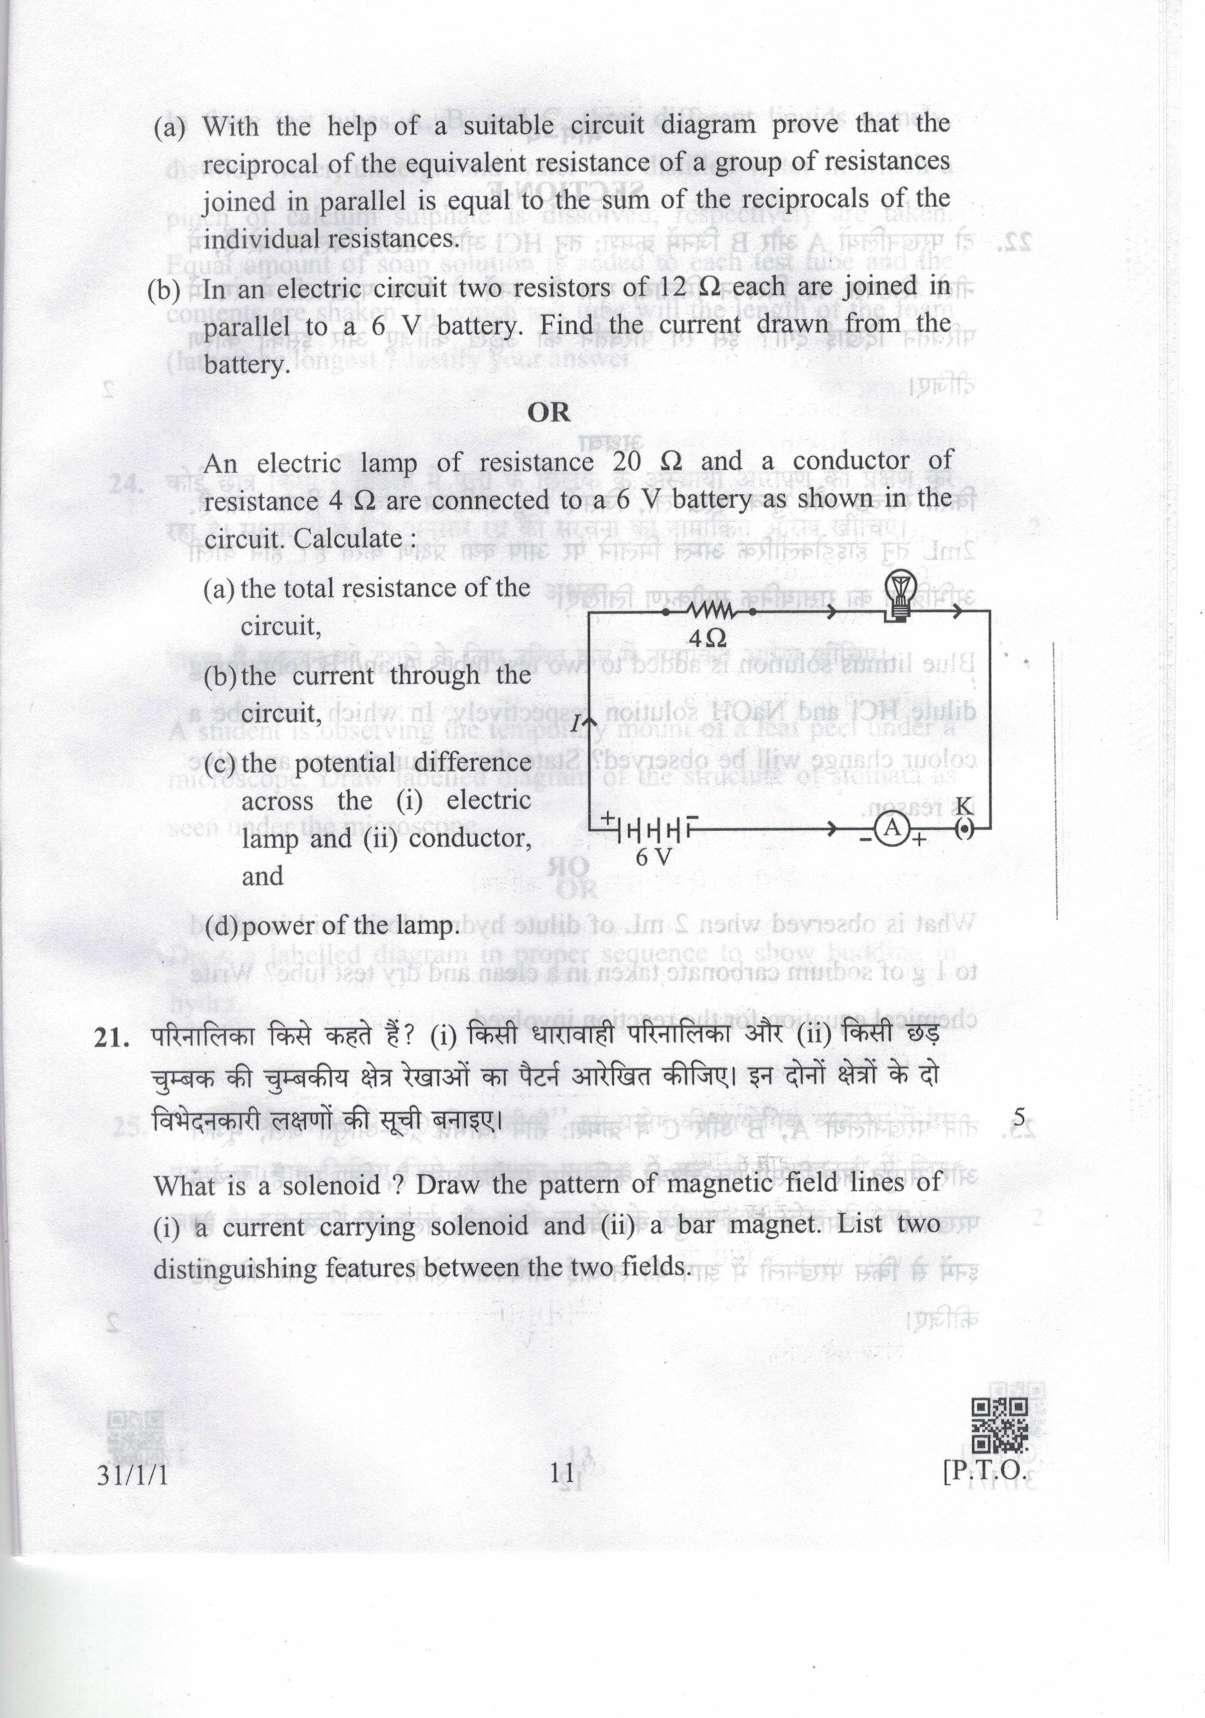 CBSE Class 10 31-1-1 Science 2019 Question Paper - Page 11